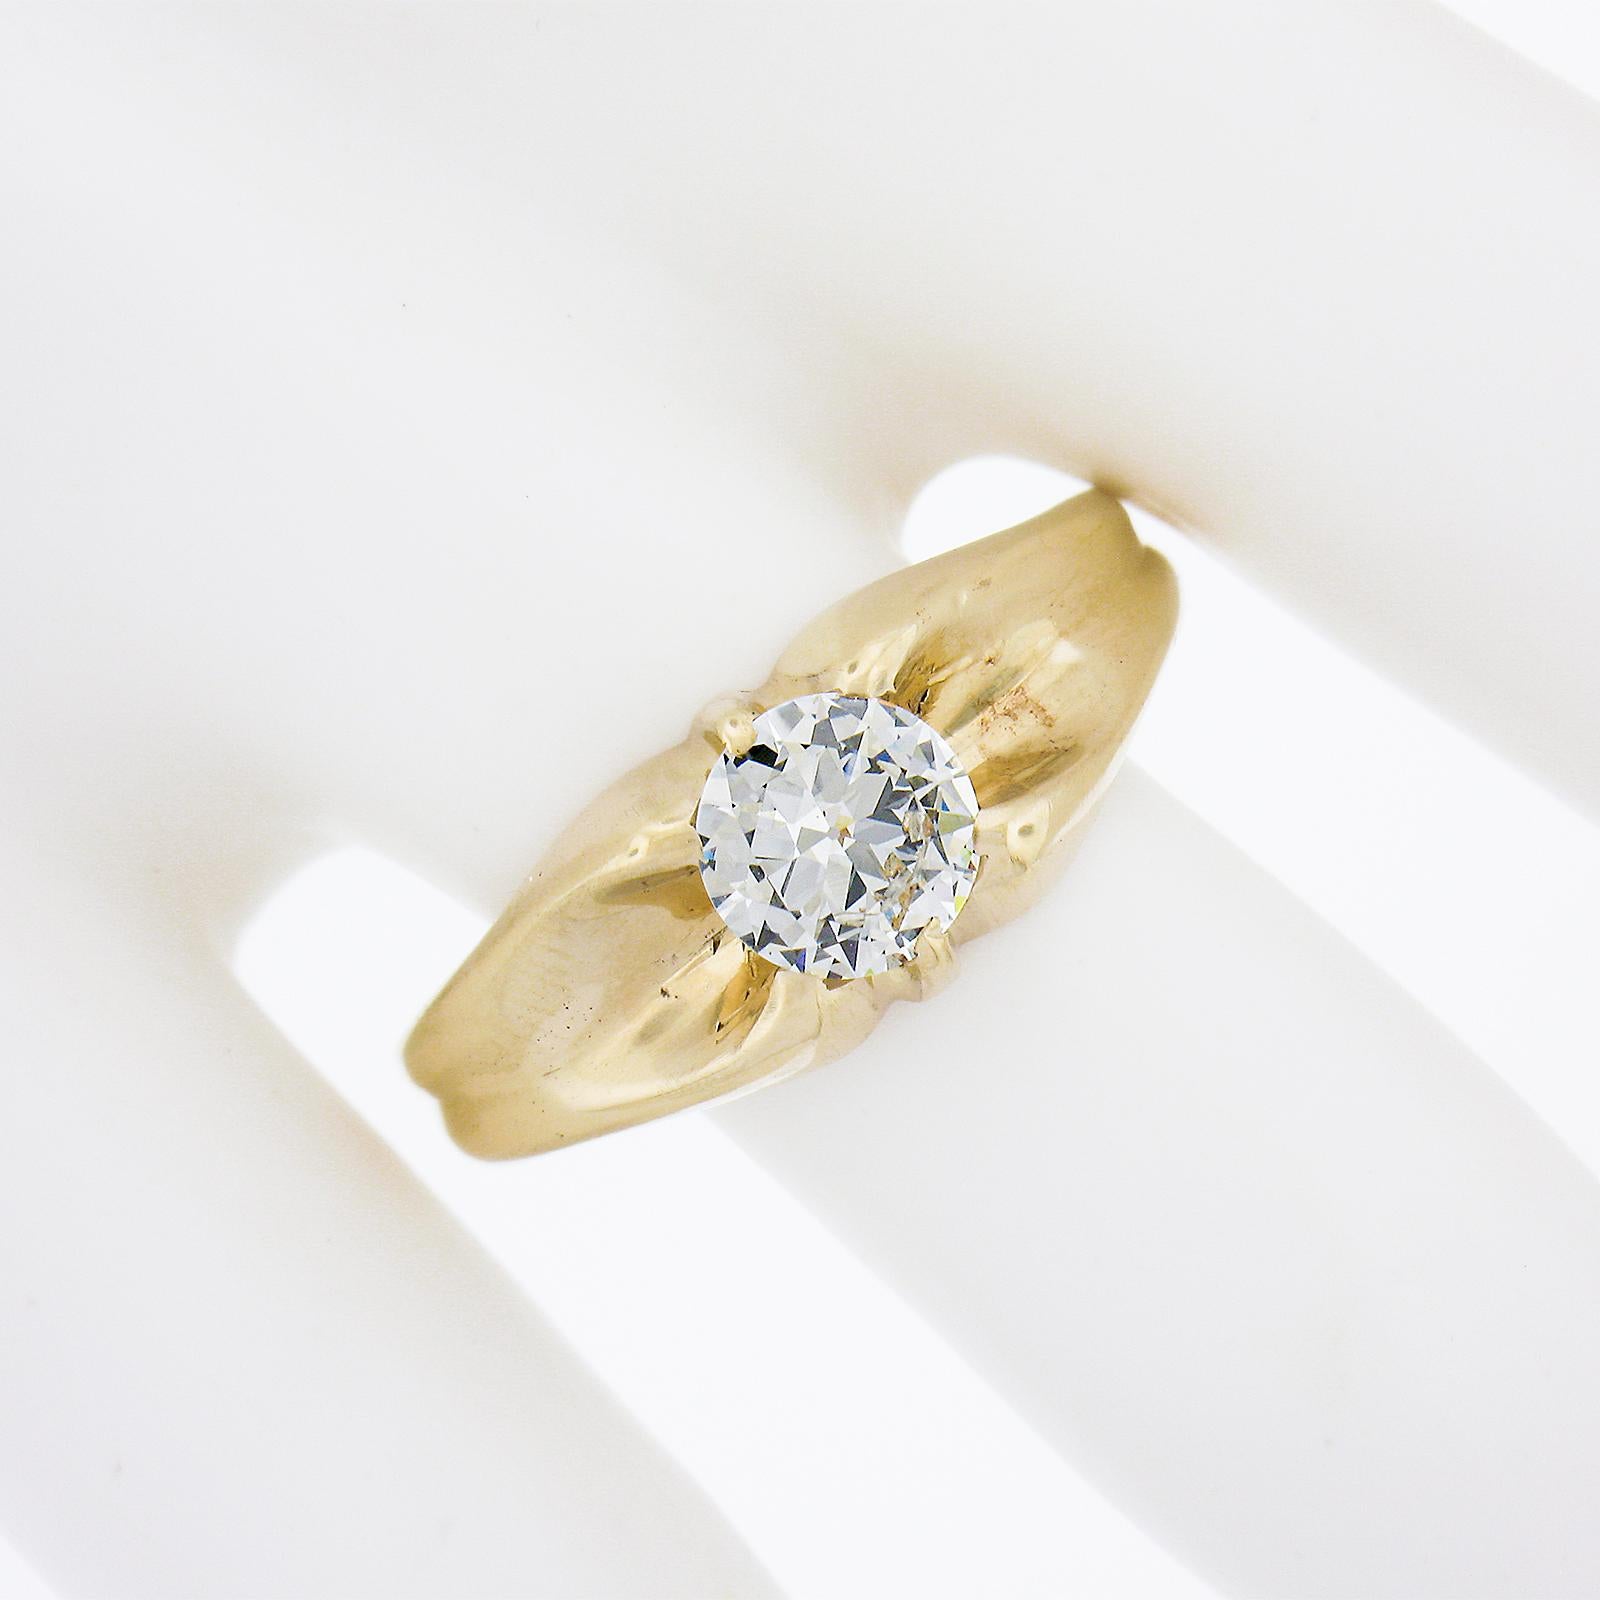 Antique 14k Gold 0.95ct GIA Certified Old Cut Belcher Diamond Engagement Ring In Good Condition For Sale In Montclair, NJ